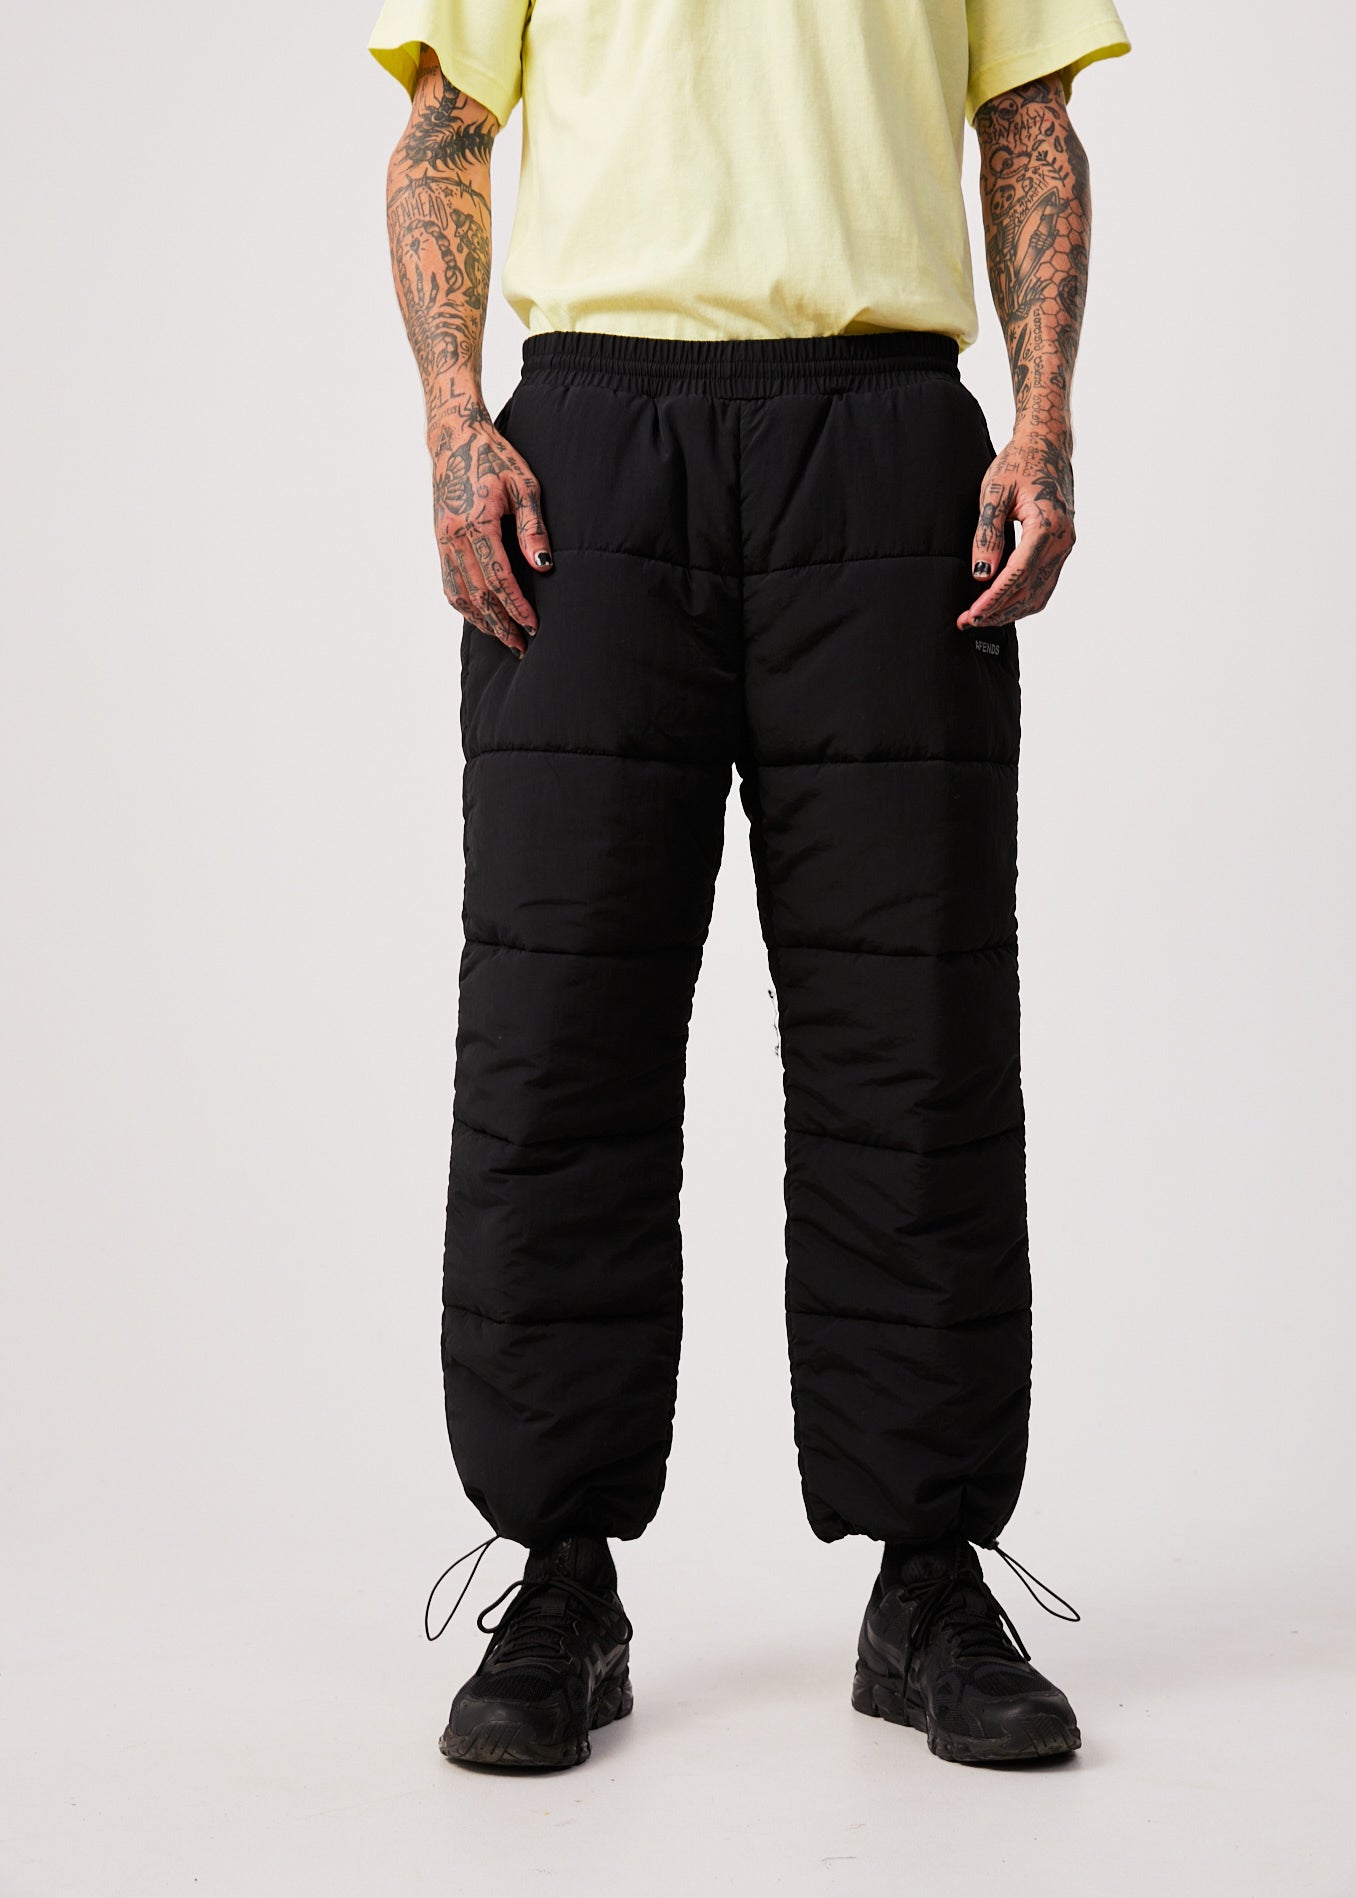 Pala - Unisex Recycled Puffer Pants - Black - Afends US.